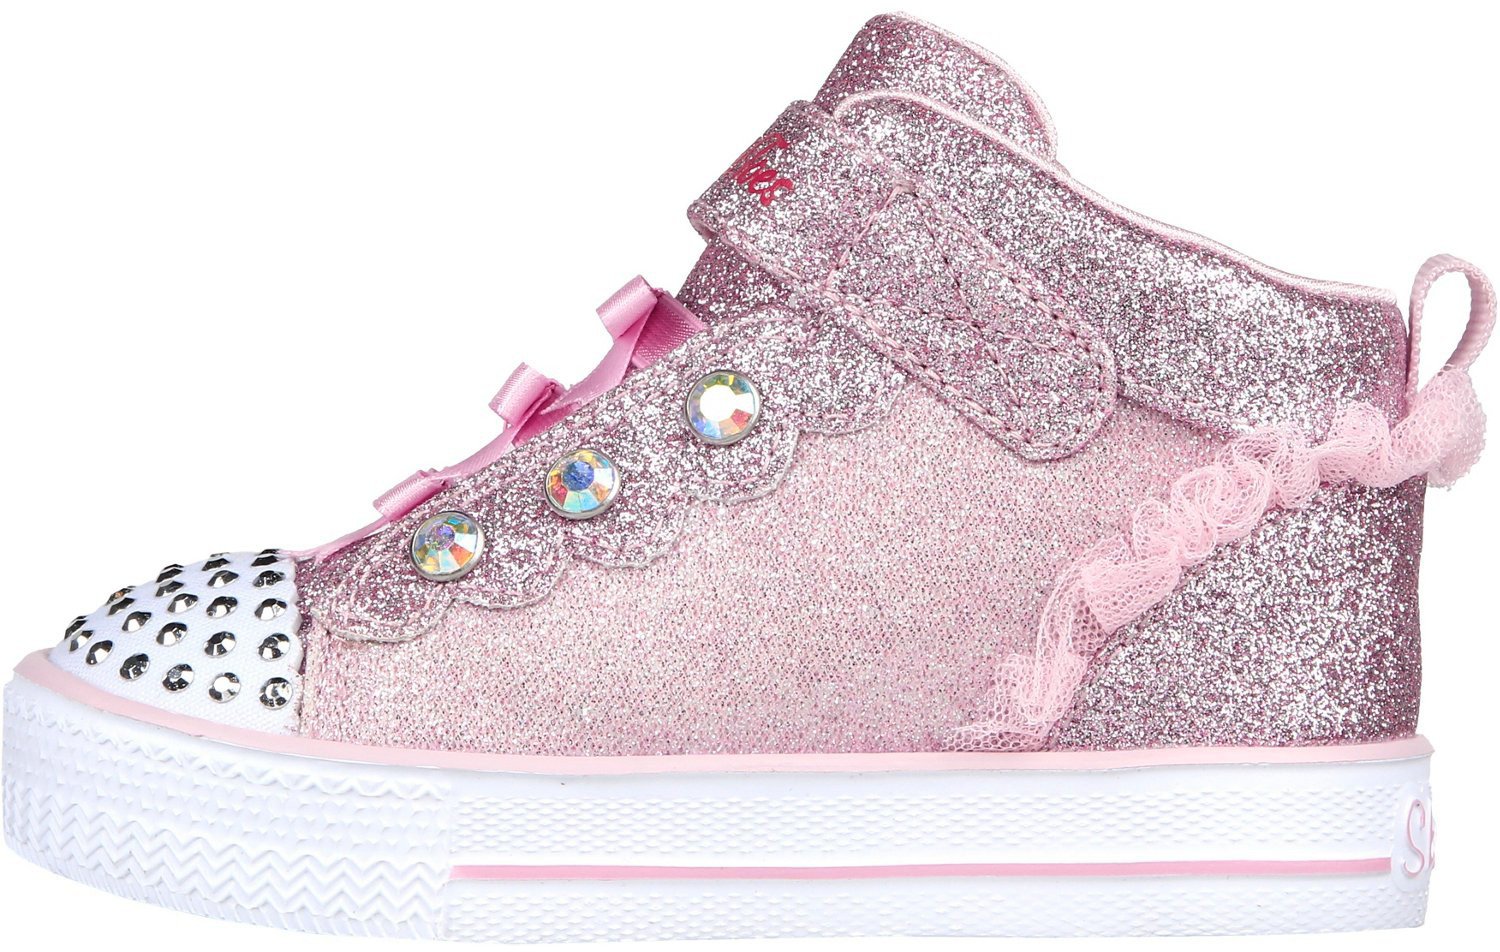 SKECHERS Toddler Girls' Twinkle Toes Shuffle Lite Strawberry Shoes ...